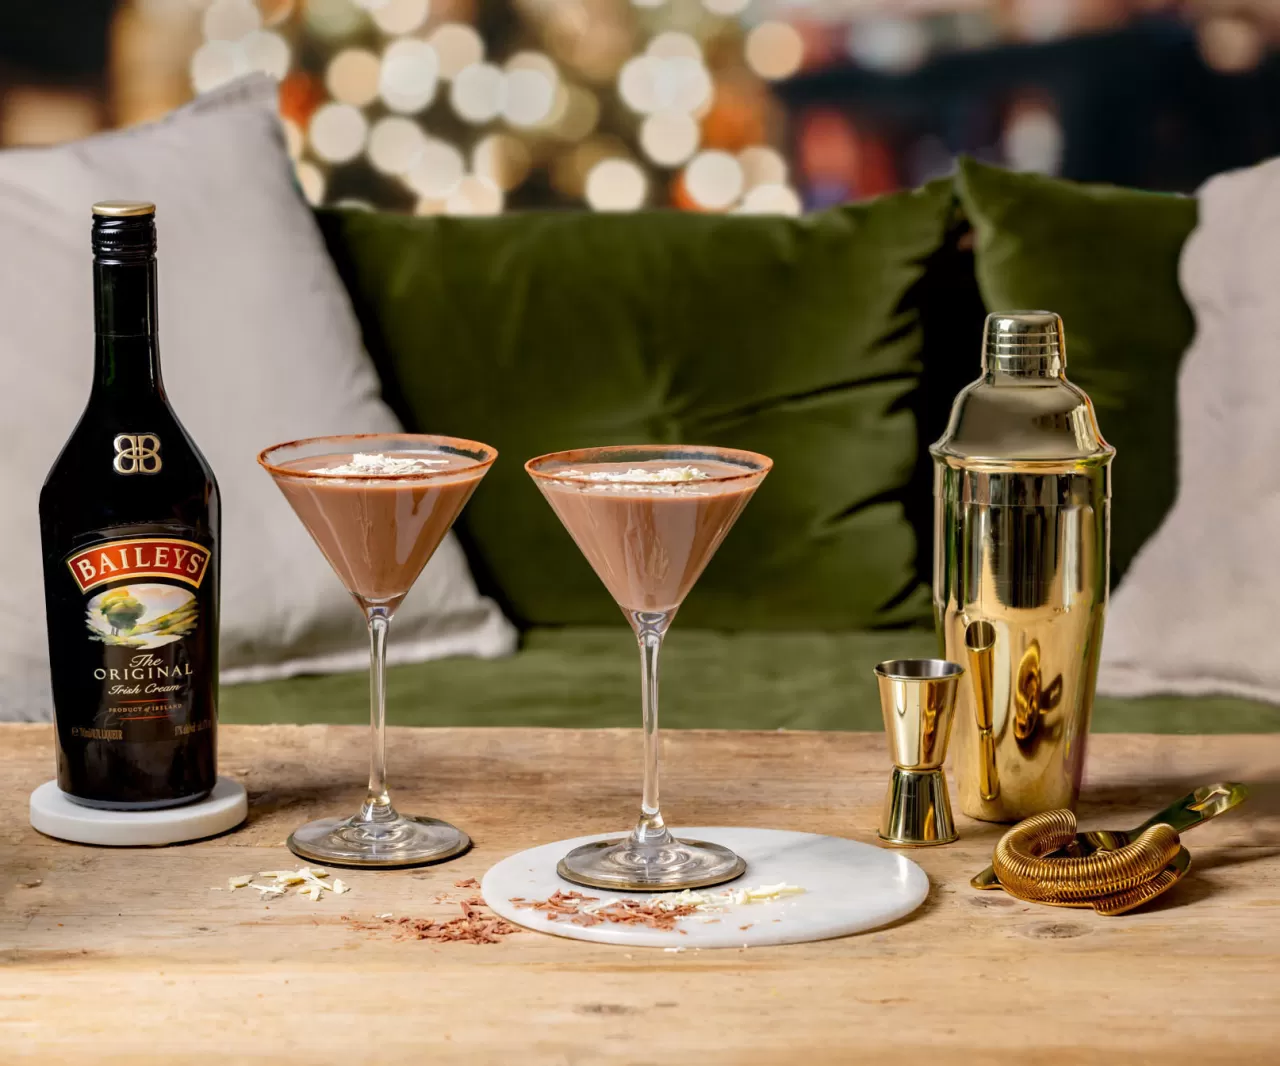 Christmas, Choctails and Festive Cheer! Treat yourself to a Baileys Hot Chocolate Martini Cocktail img#1